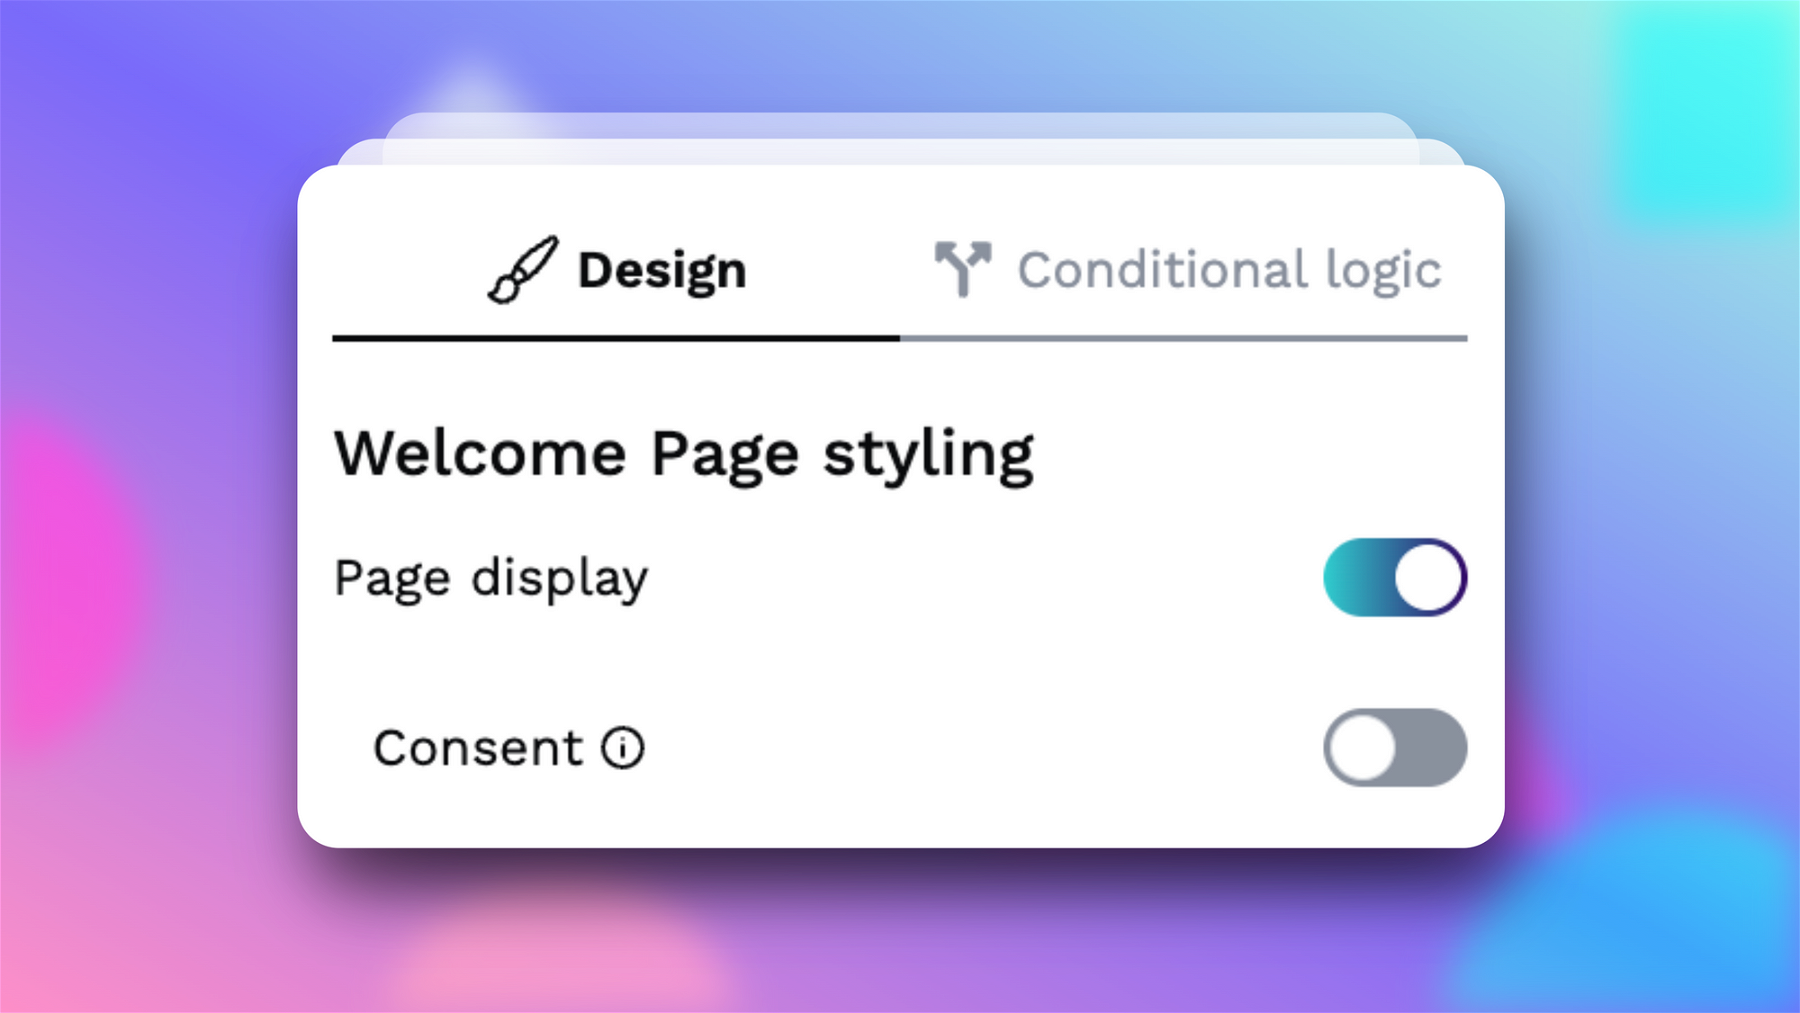 A screenshot of the Welcome Page styling options, located under the Design tab on the right side of the DeForm editor.